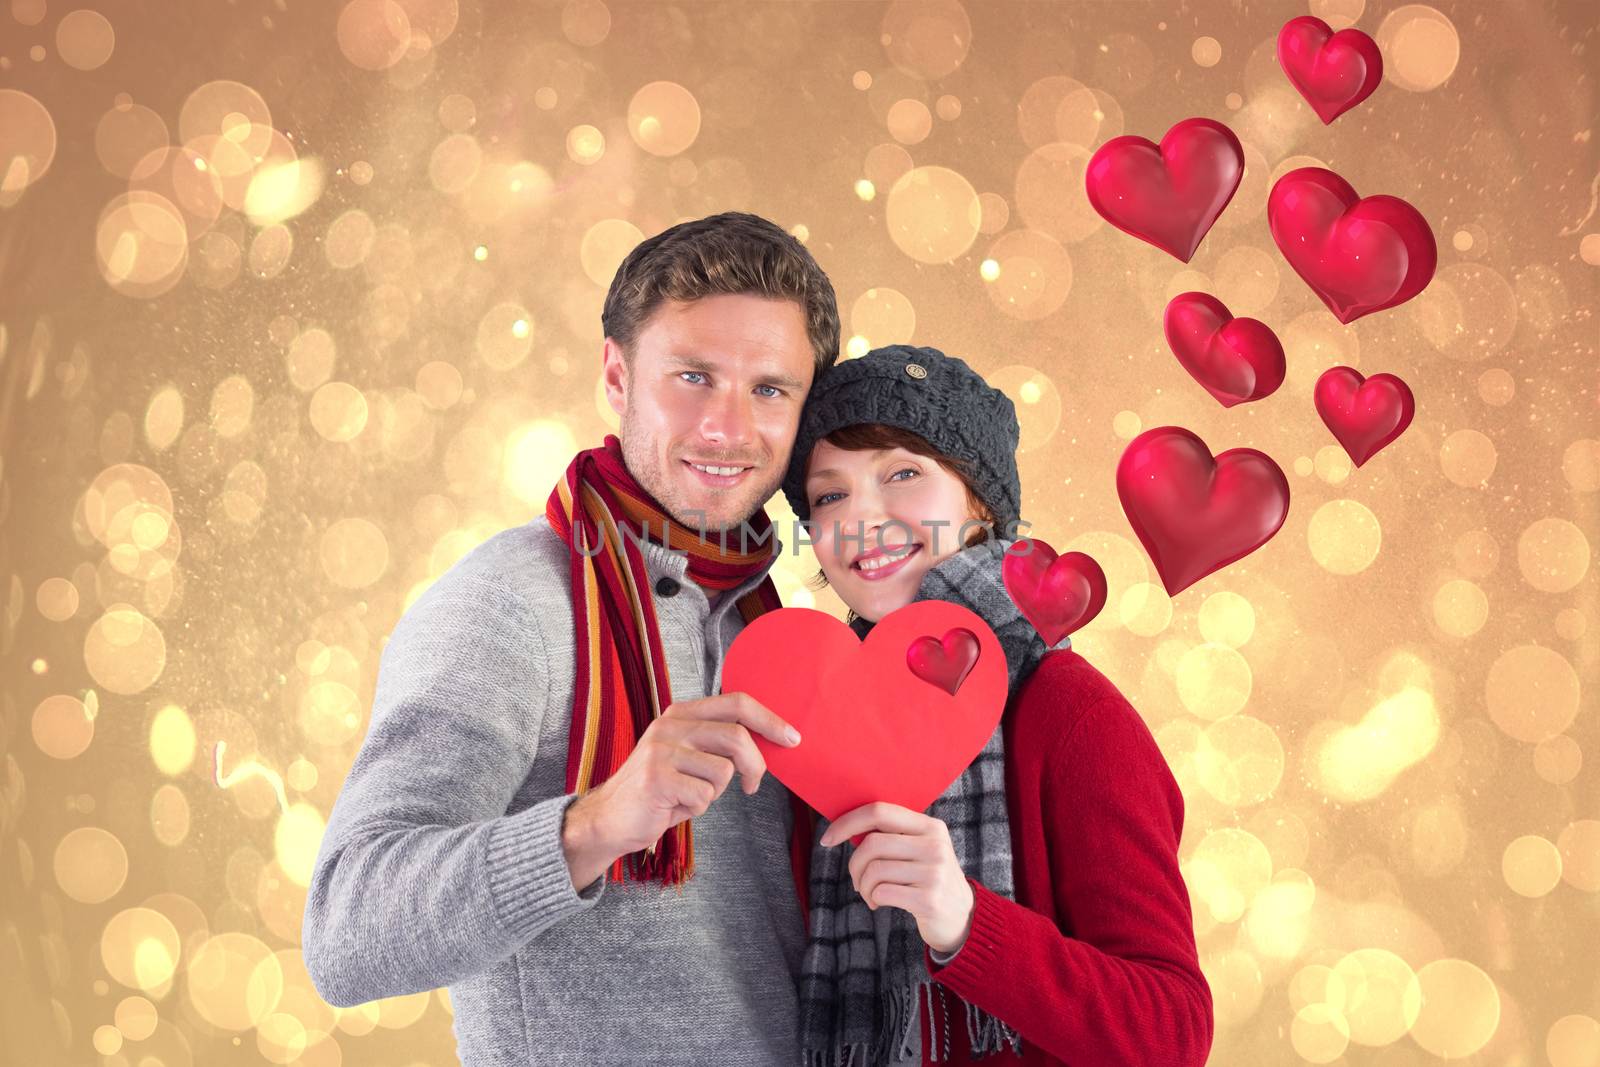 Couple holding a red heart against yellow abstract light spot design